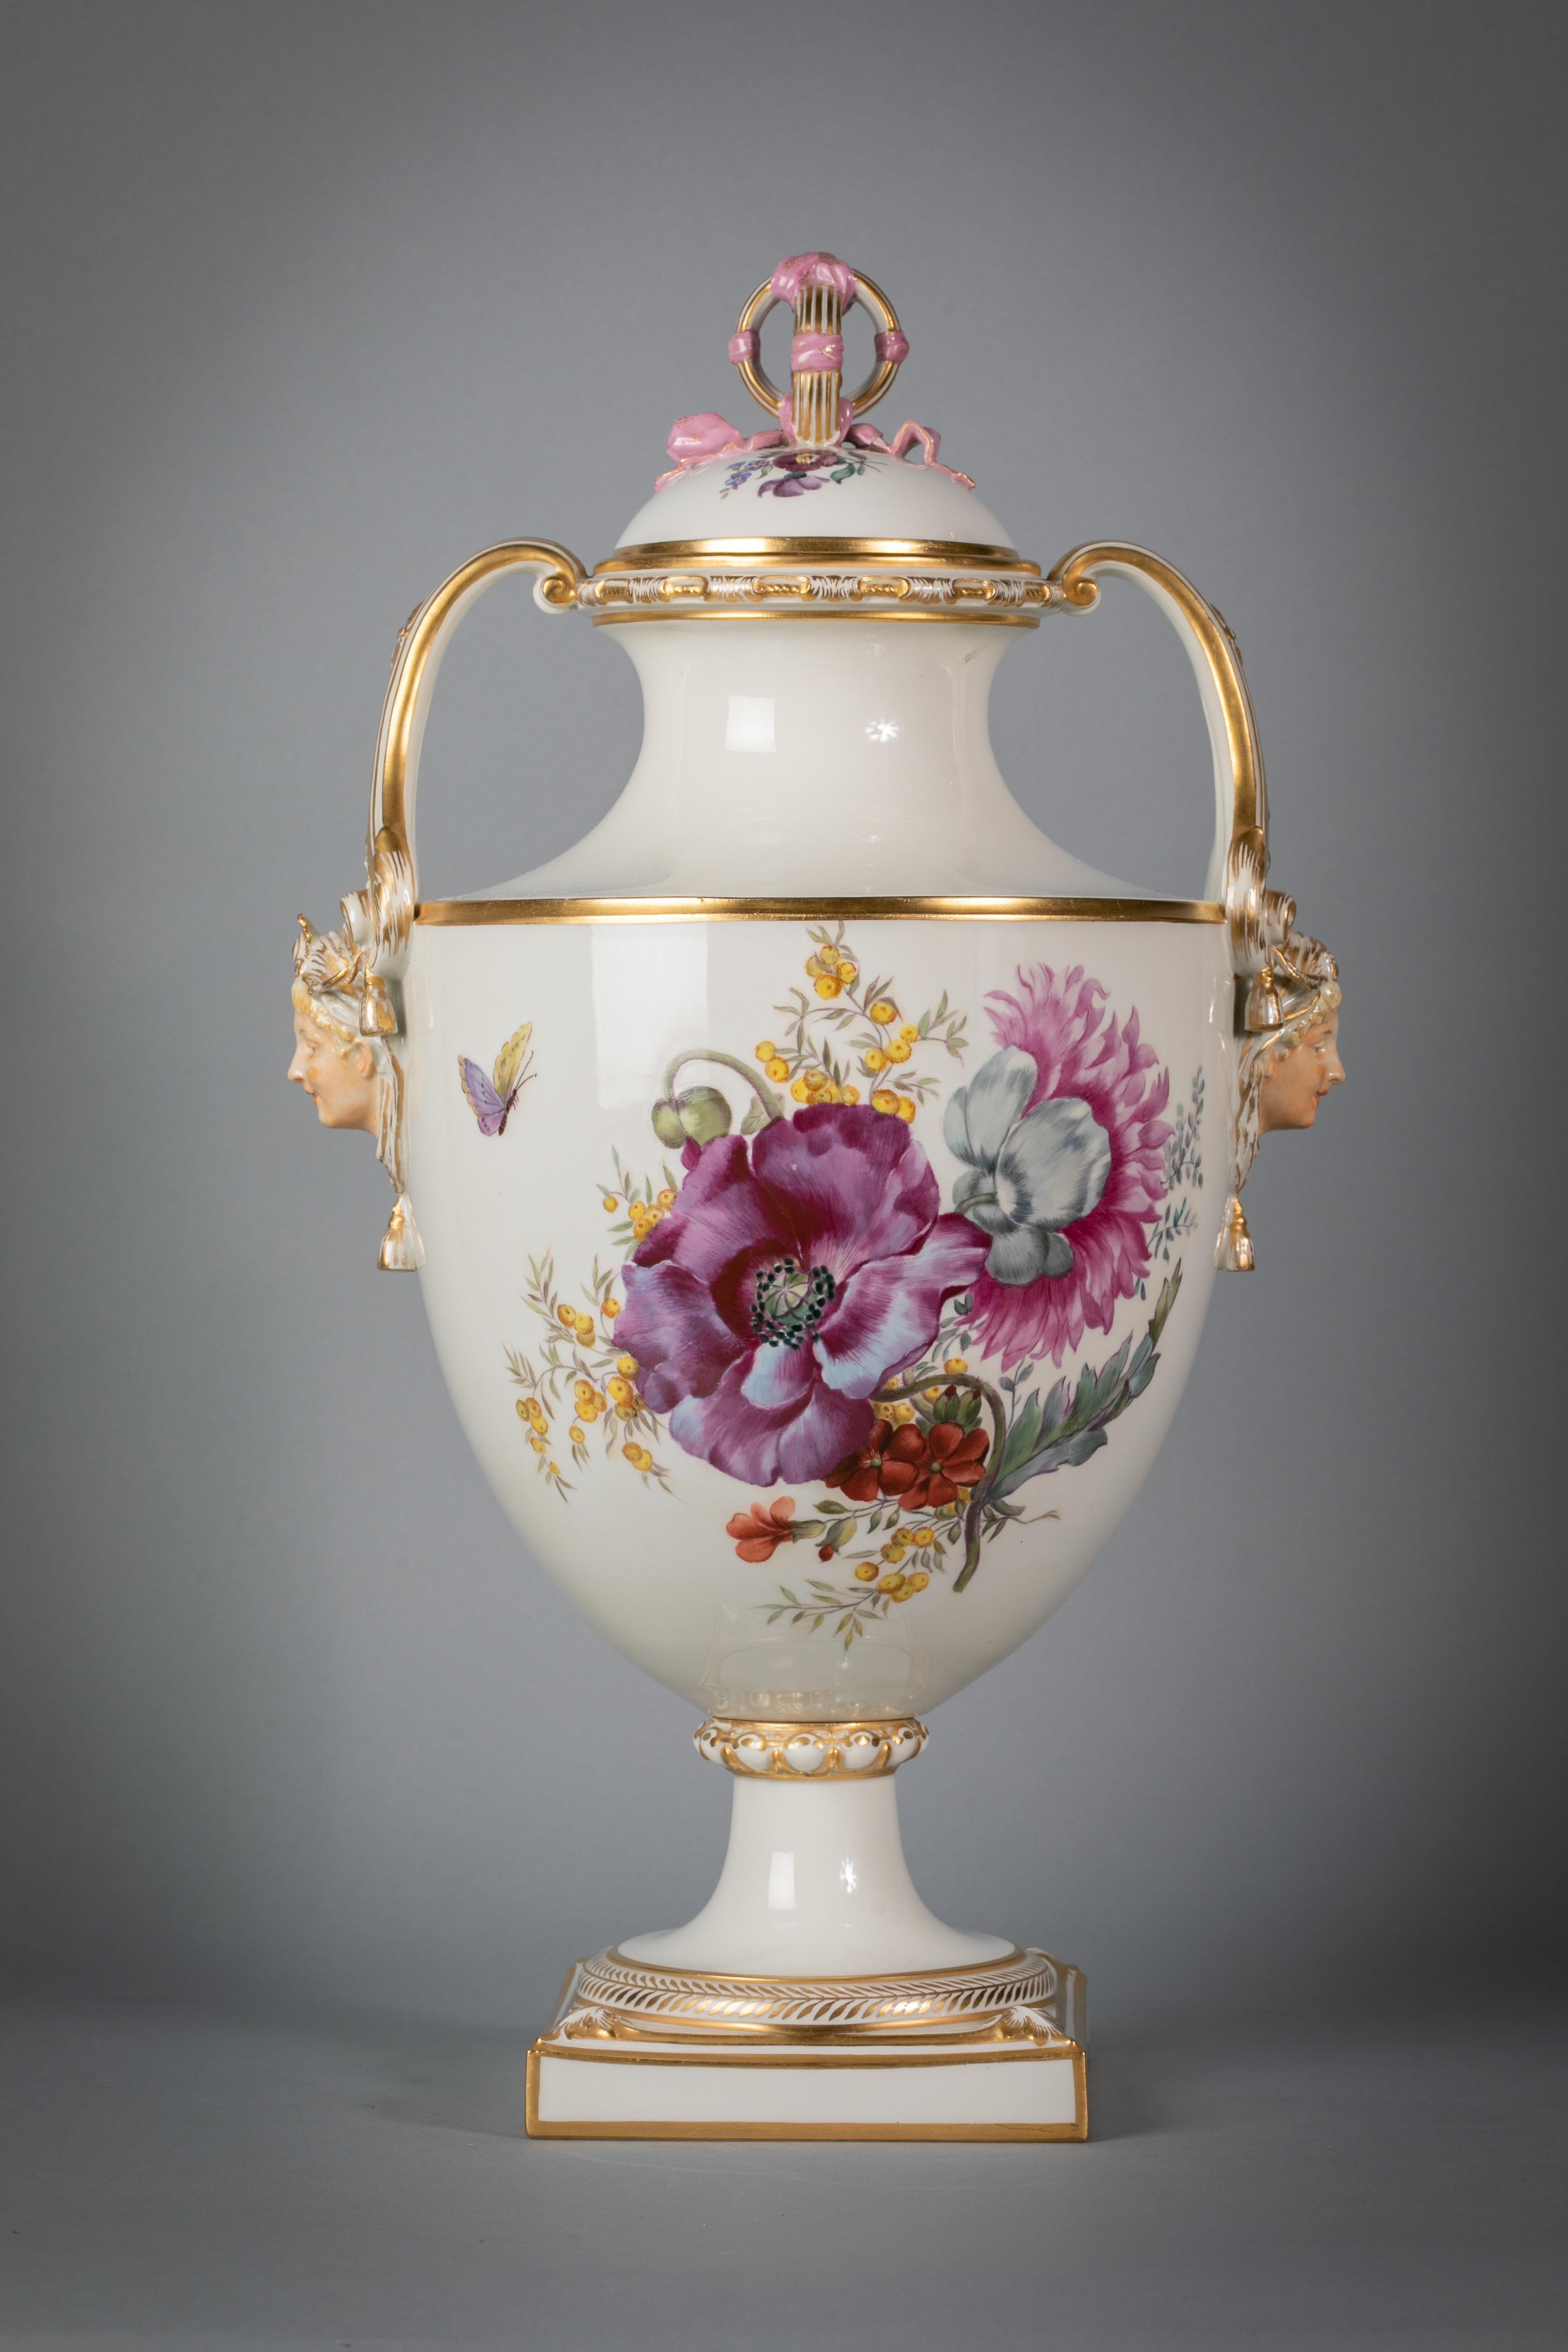 Painted on both with large floral bouquet, with masked handles and the cover similarly decorated with looped finial. With under glaze blue canceled mark.